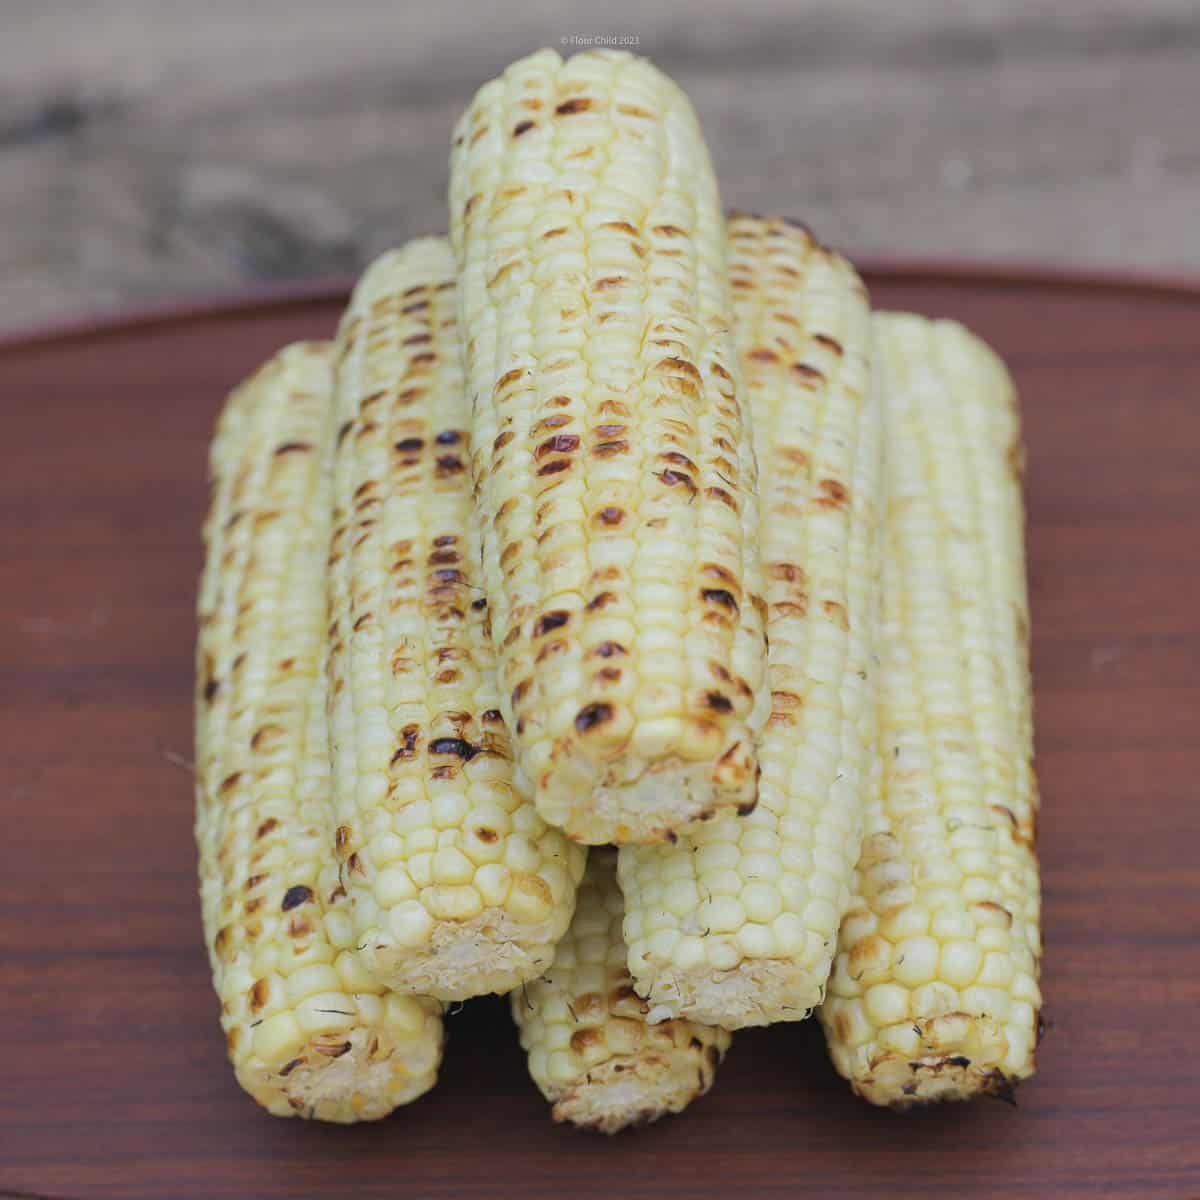 Six ears of grilled, browned corn stacked on a wooden serving tray.